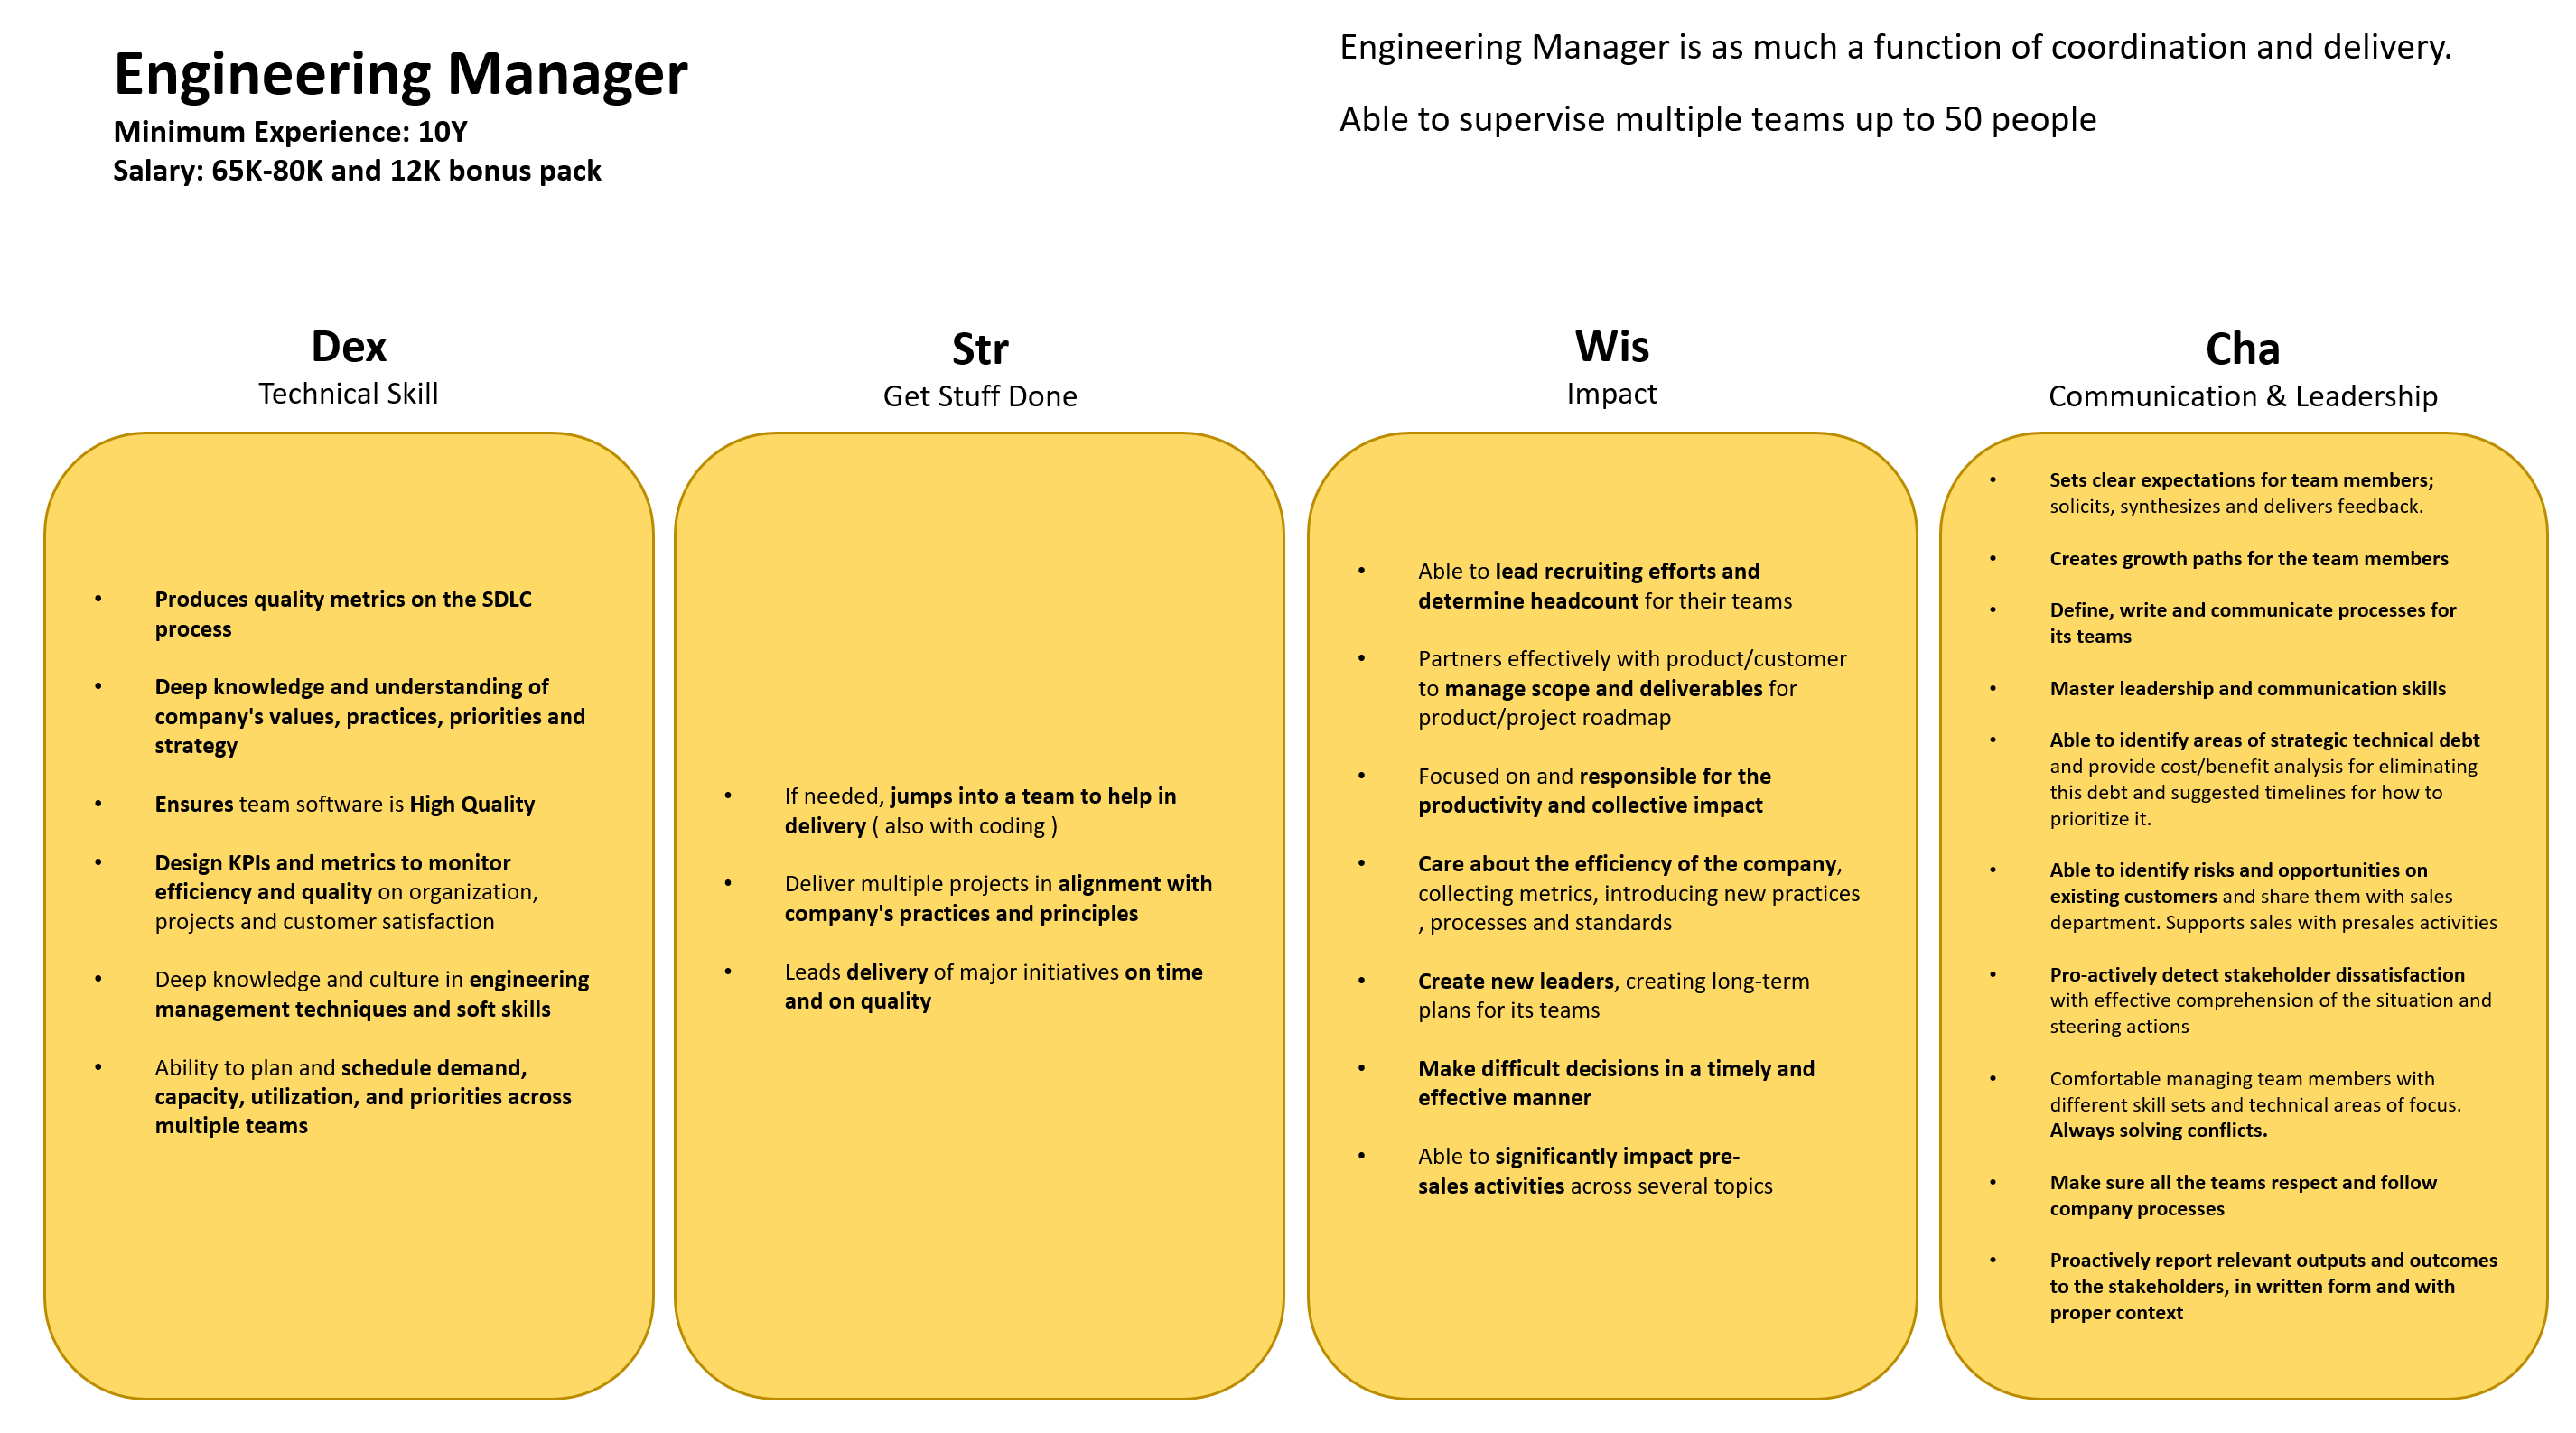 EngManager